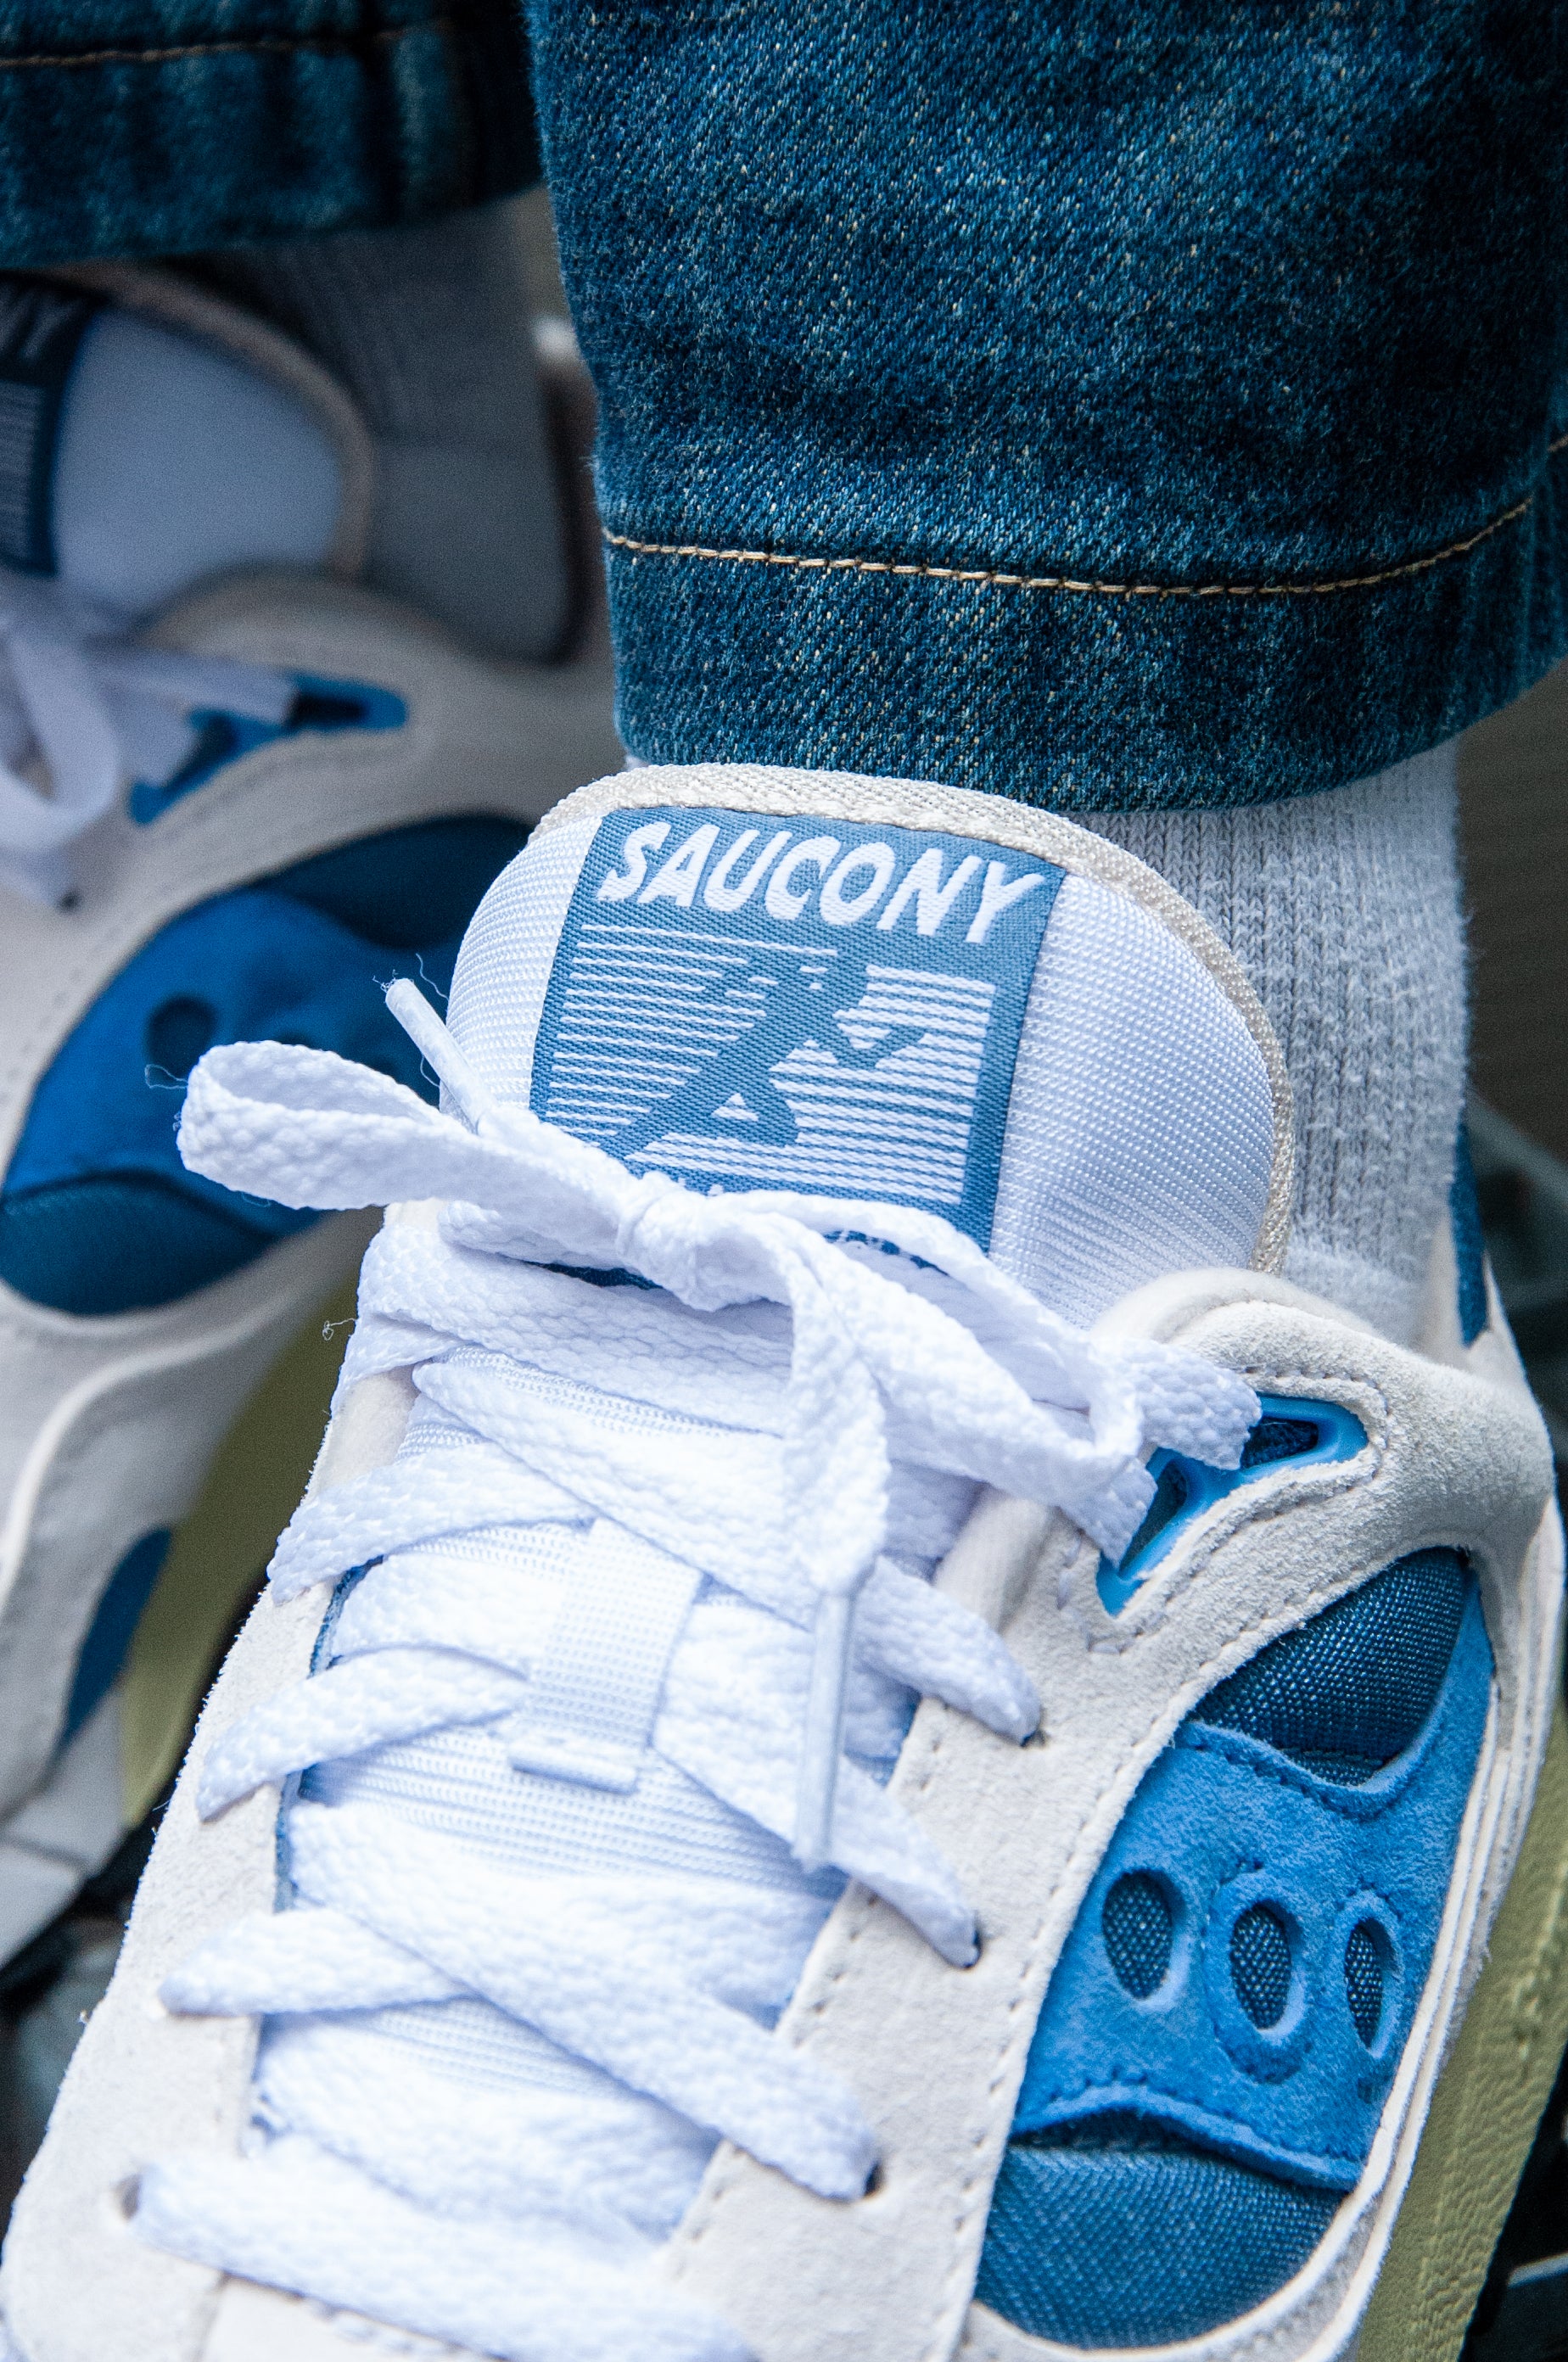 Saucony Shadow 6000 "White/Blue" S70441-13